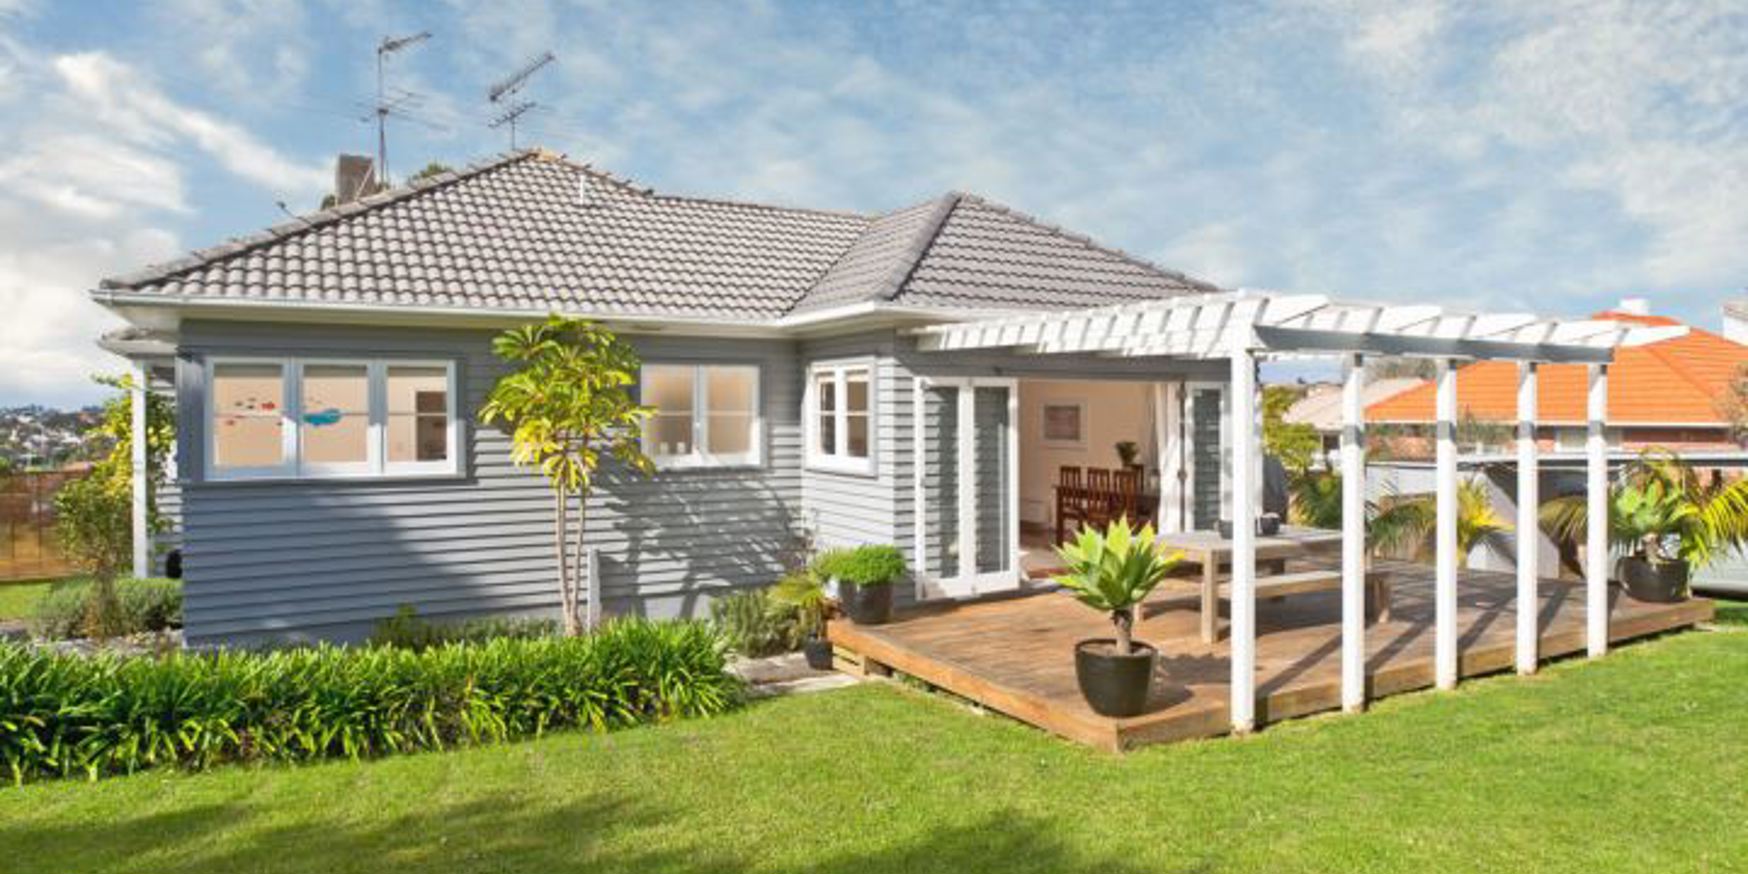 A stylish 1930s bungalow, a typical and popular feature of the Orakei area.